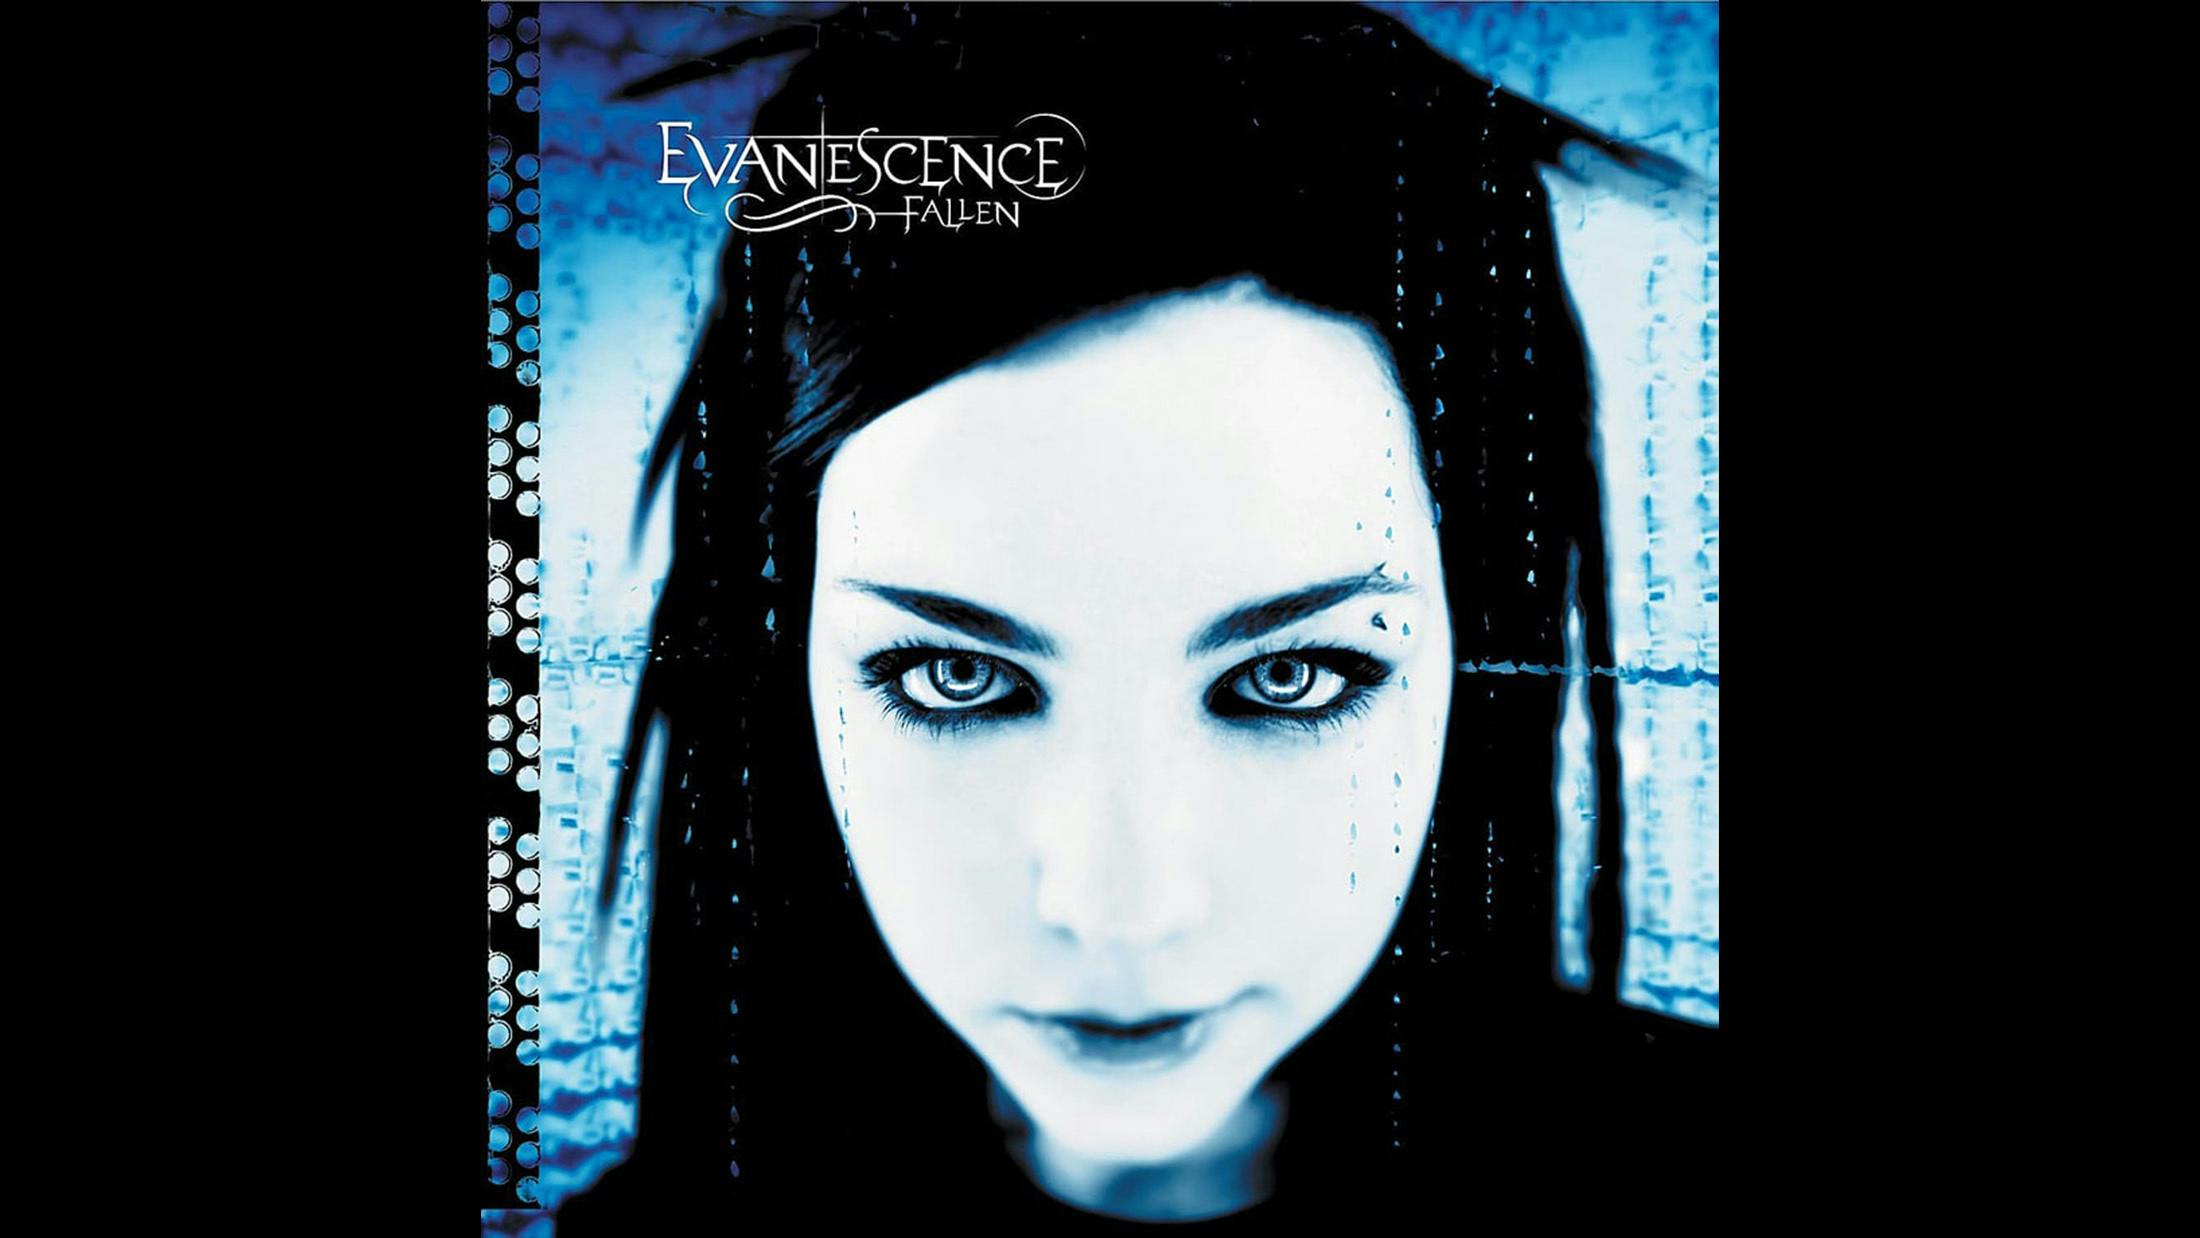 In 2003, you’d have had to have exiled yourself to the most remote of desert islands to not hear Bring Me To Life, the mighty lead single from Evanescence’s debut album, Fallen, blaring from speakers. Not that you’d have wanted to get away from it, of course; having sold 17 million copies to date and remaining Amy Lee and co.’s most successful album, it’s clear not a lot of people wanted to.